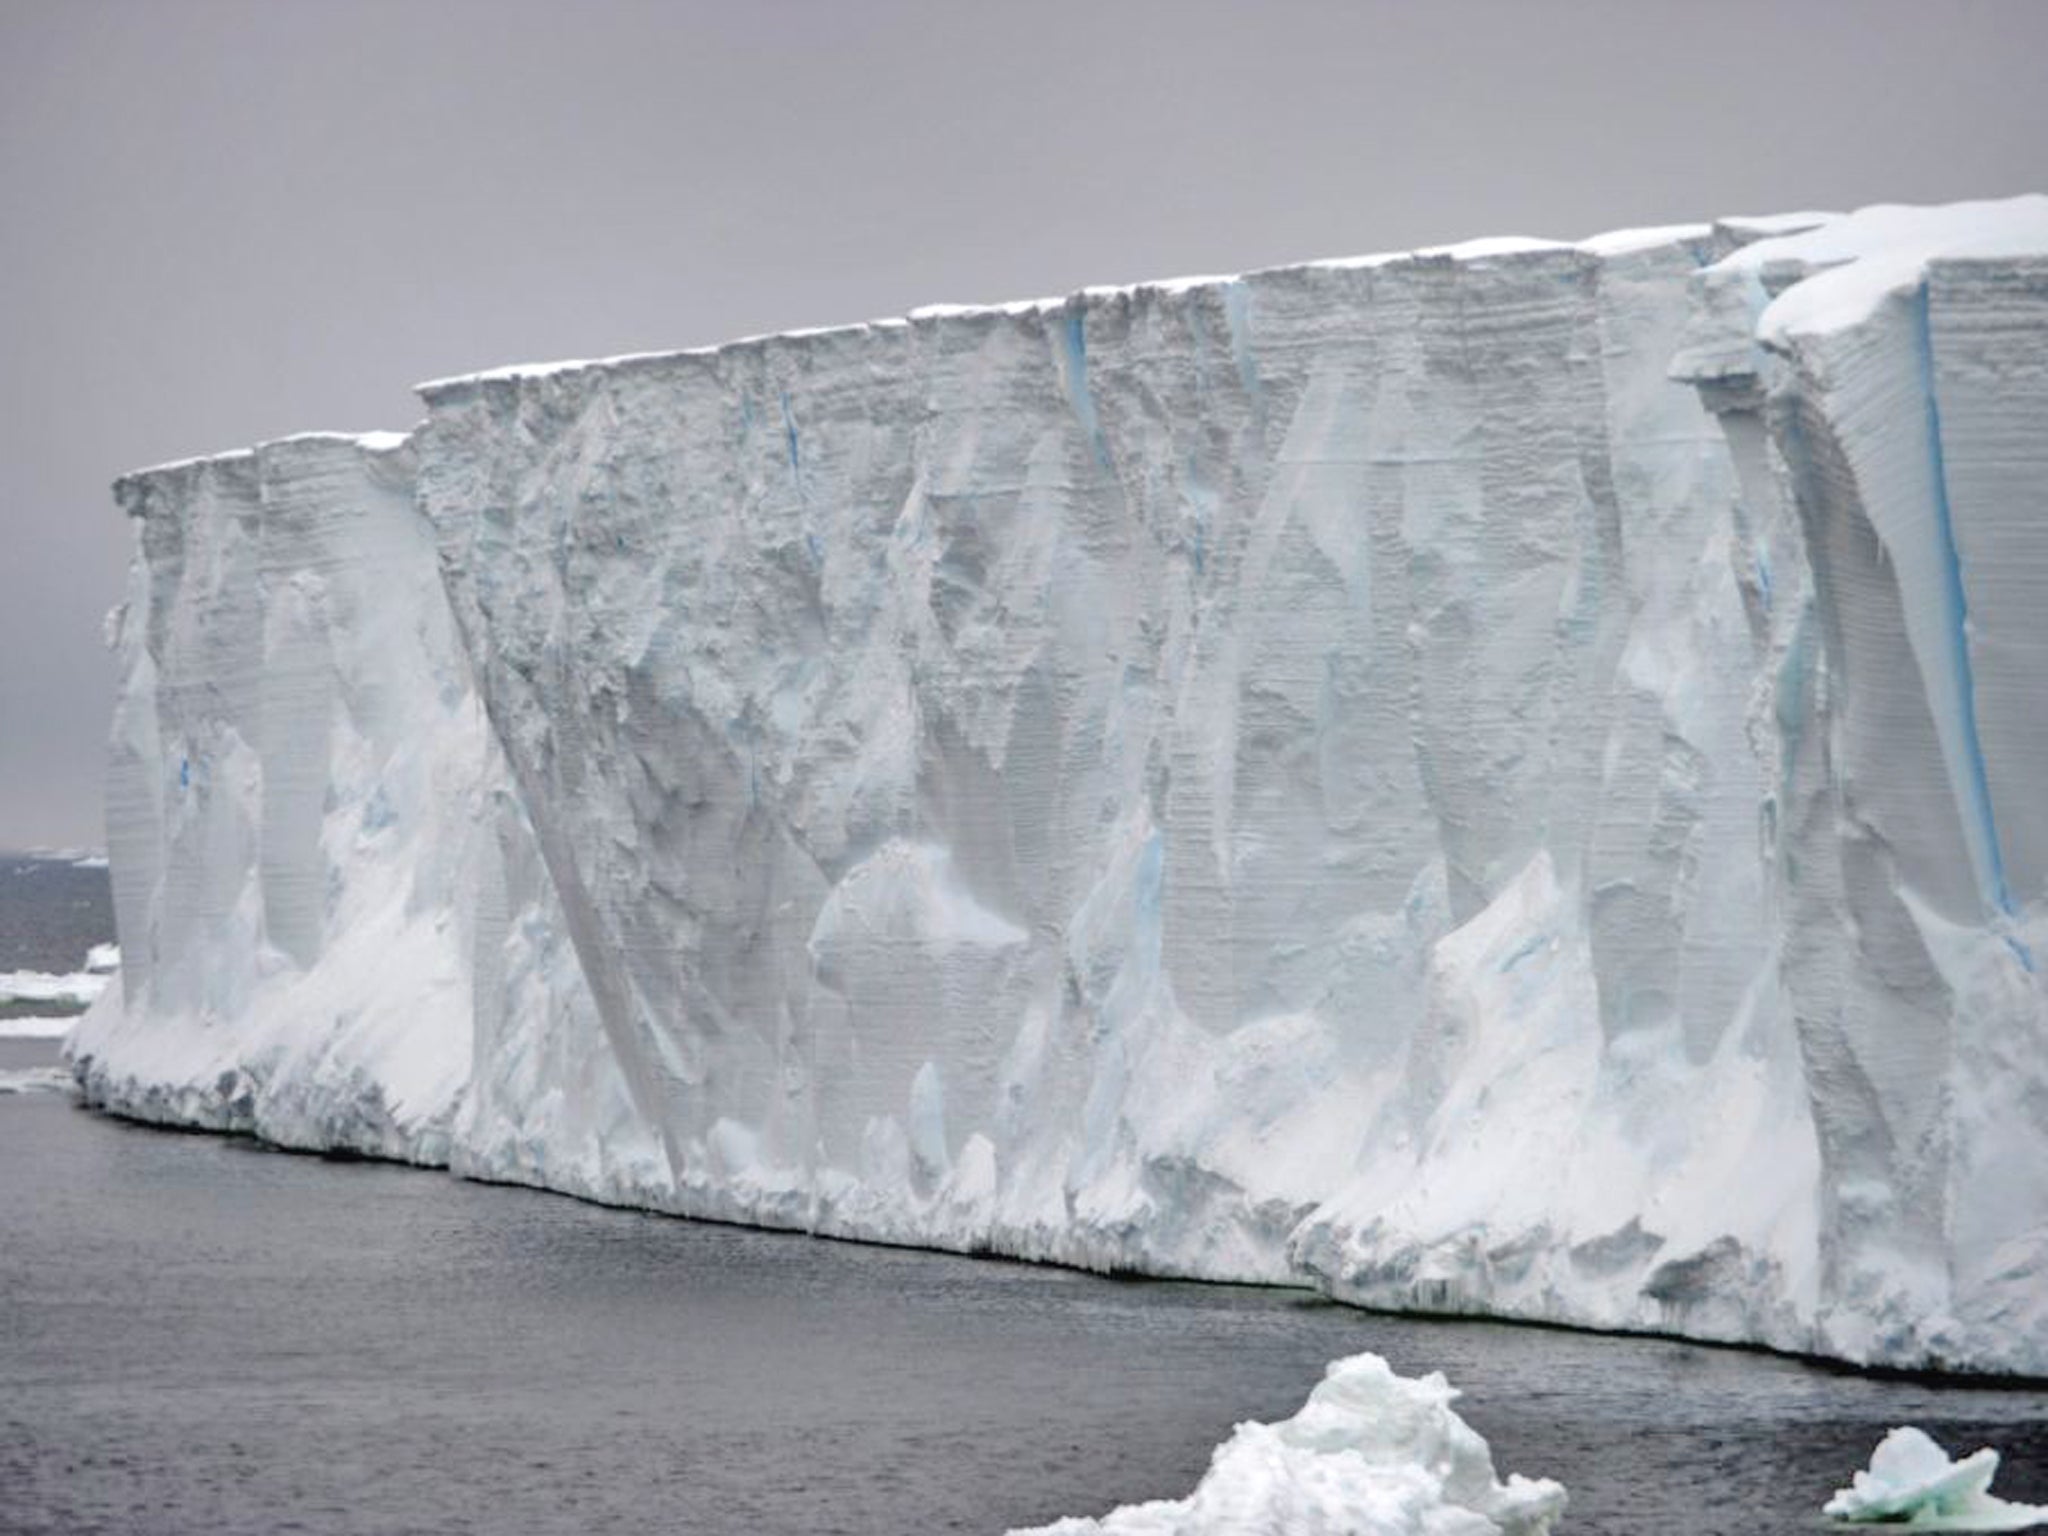 Several ice shelves around the Antarctic Peninsula have already collapsed